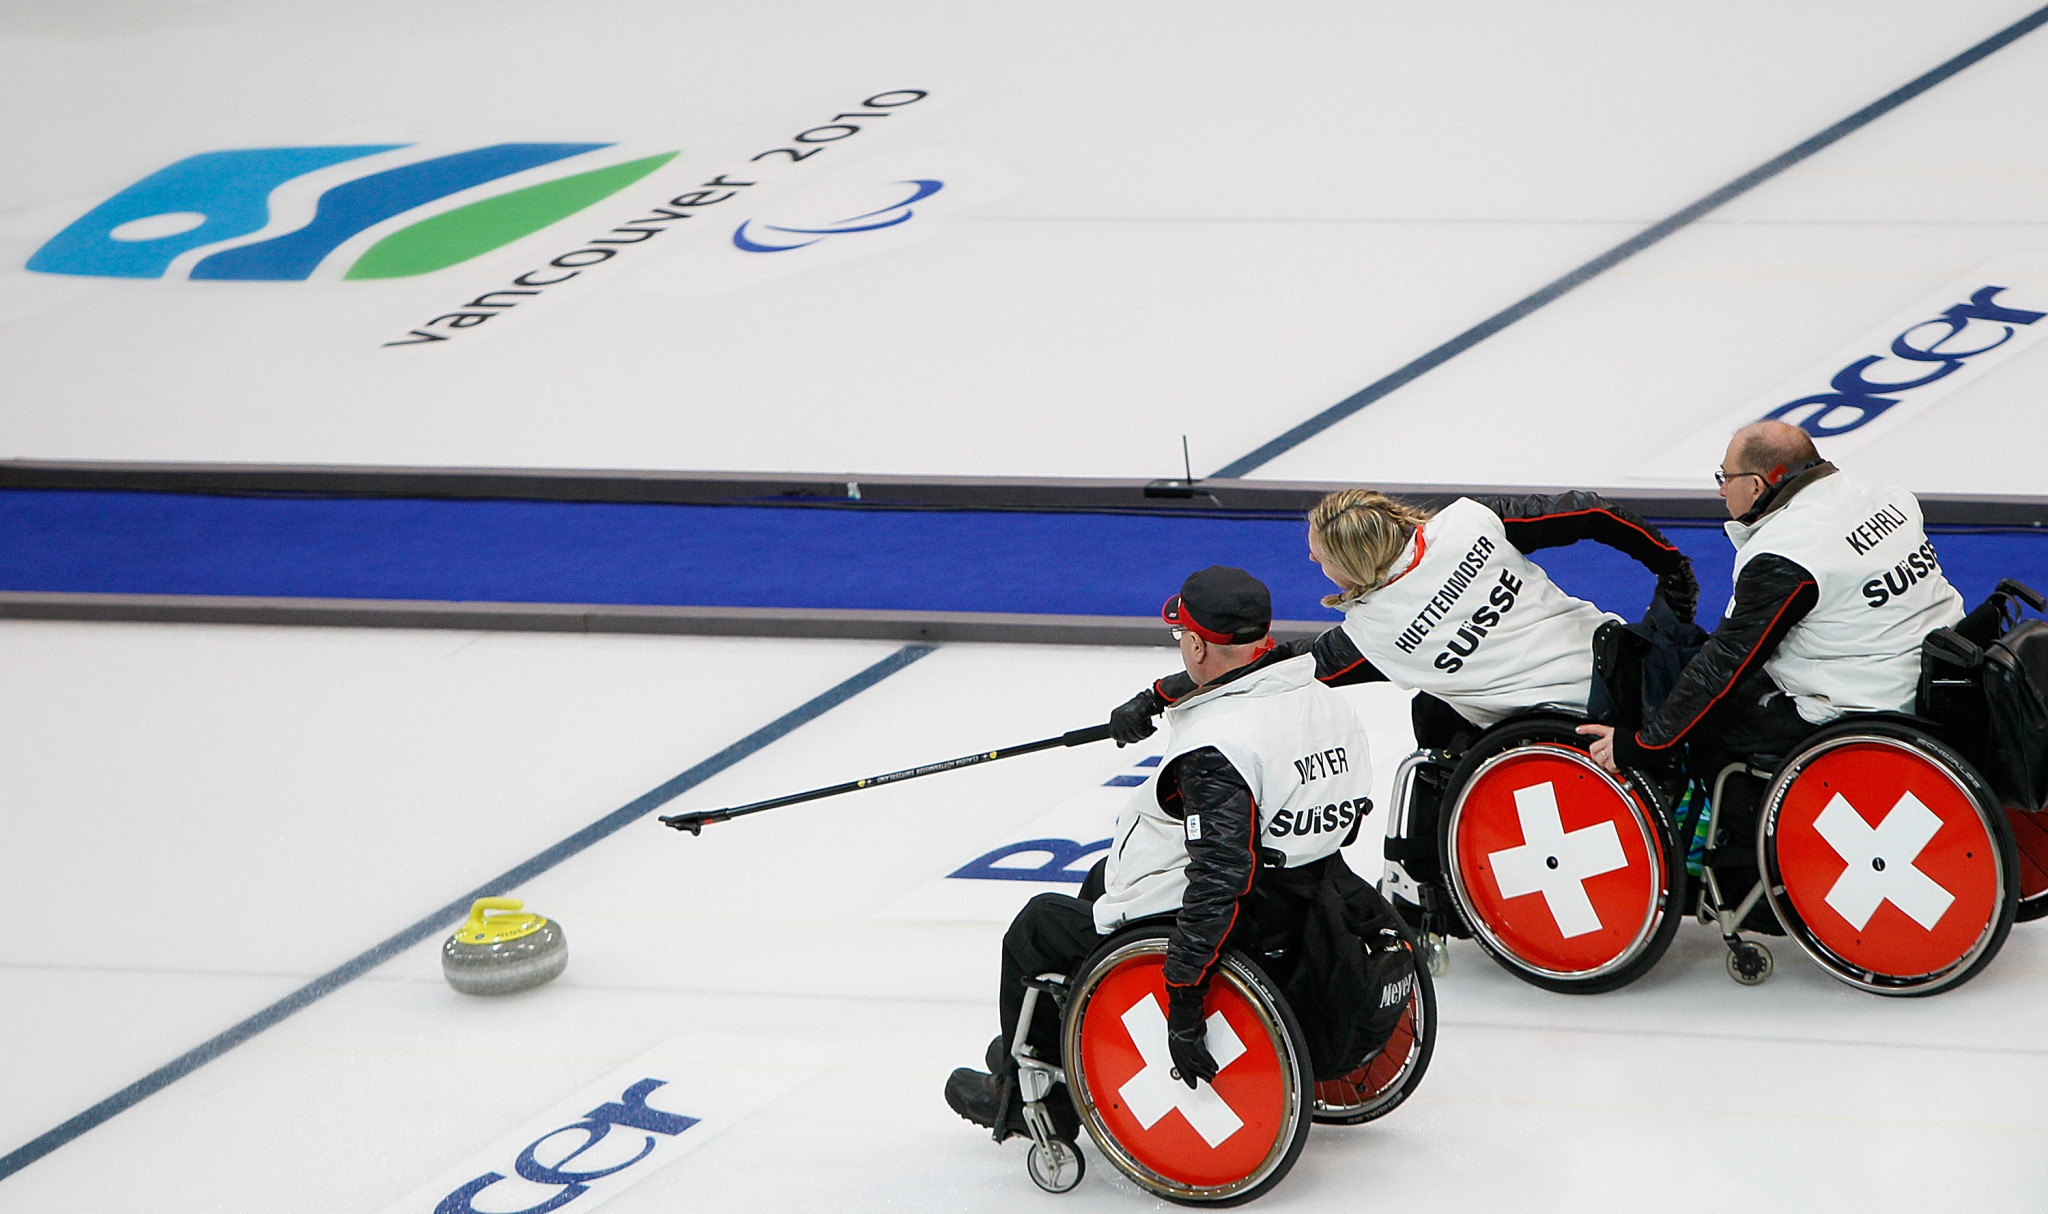 The Swiss wheelchair curling team appeared at the Vancouver 2010 Paralympics ©Getty Images